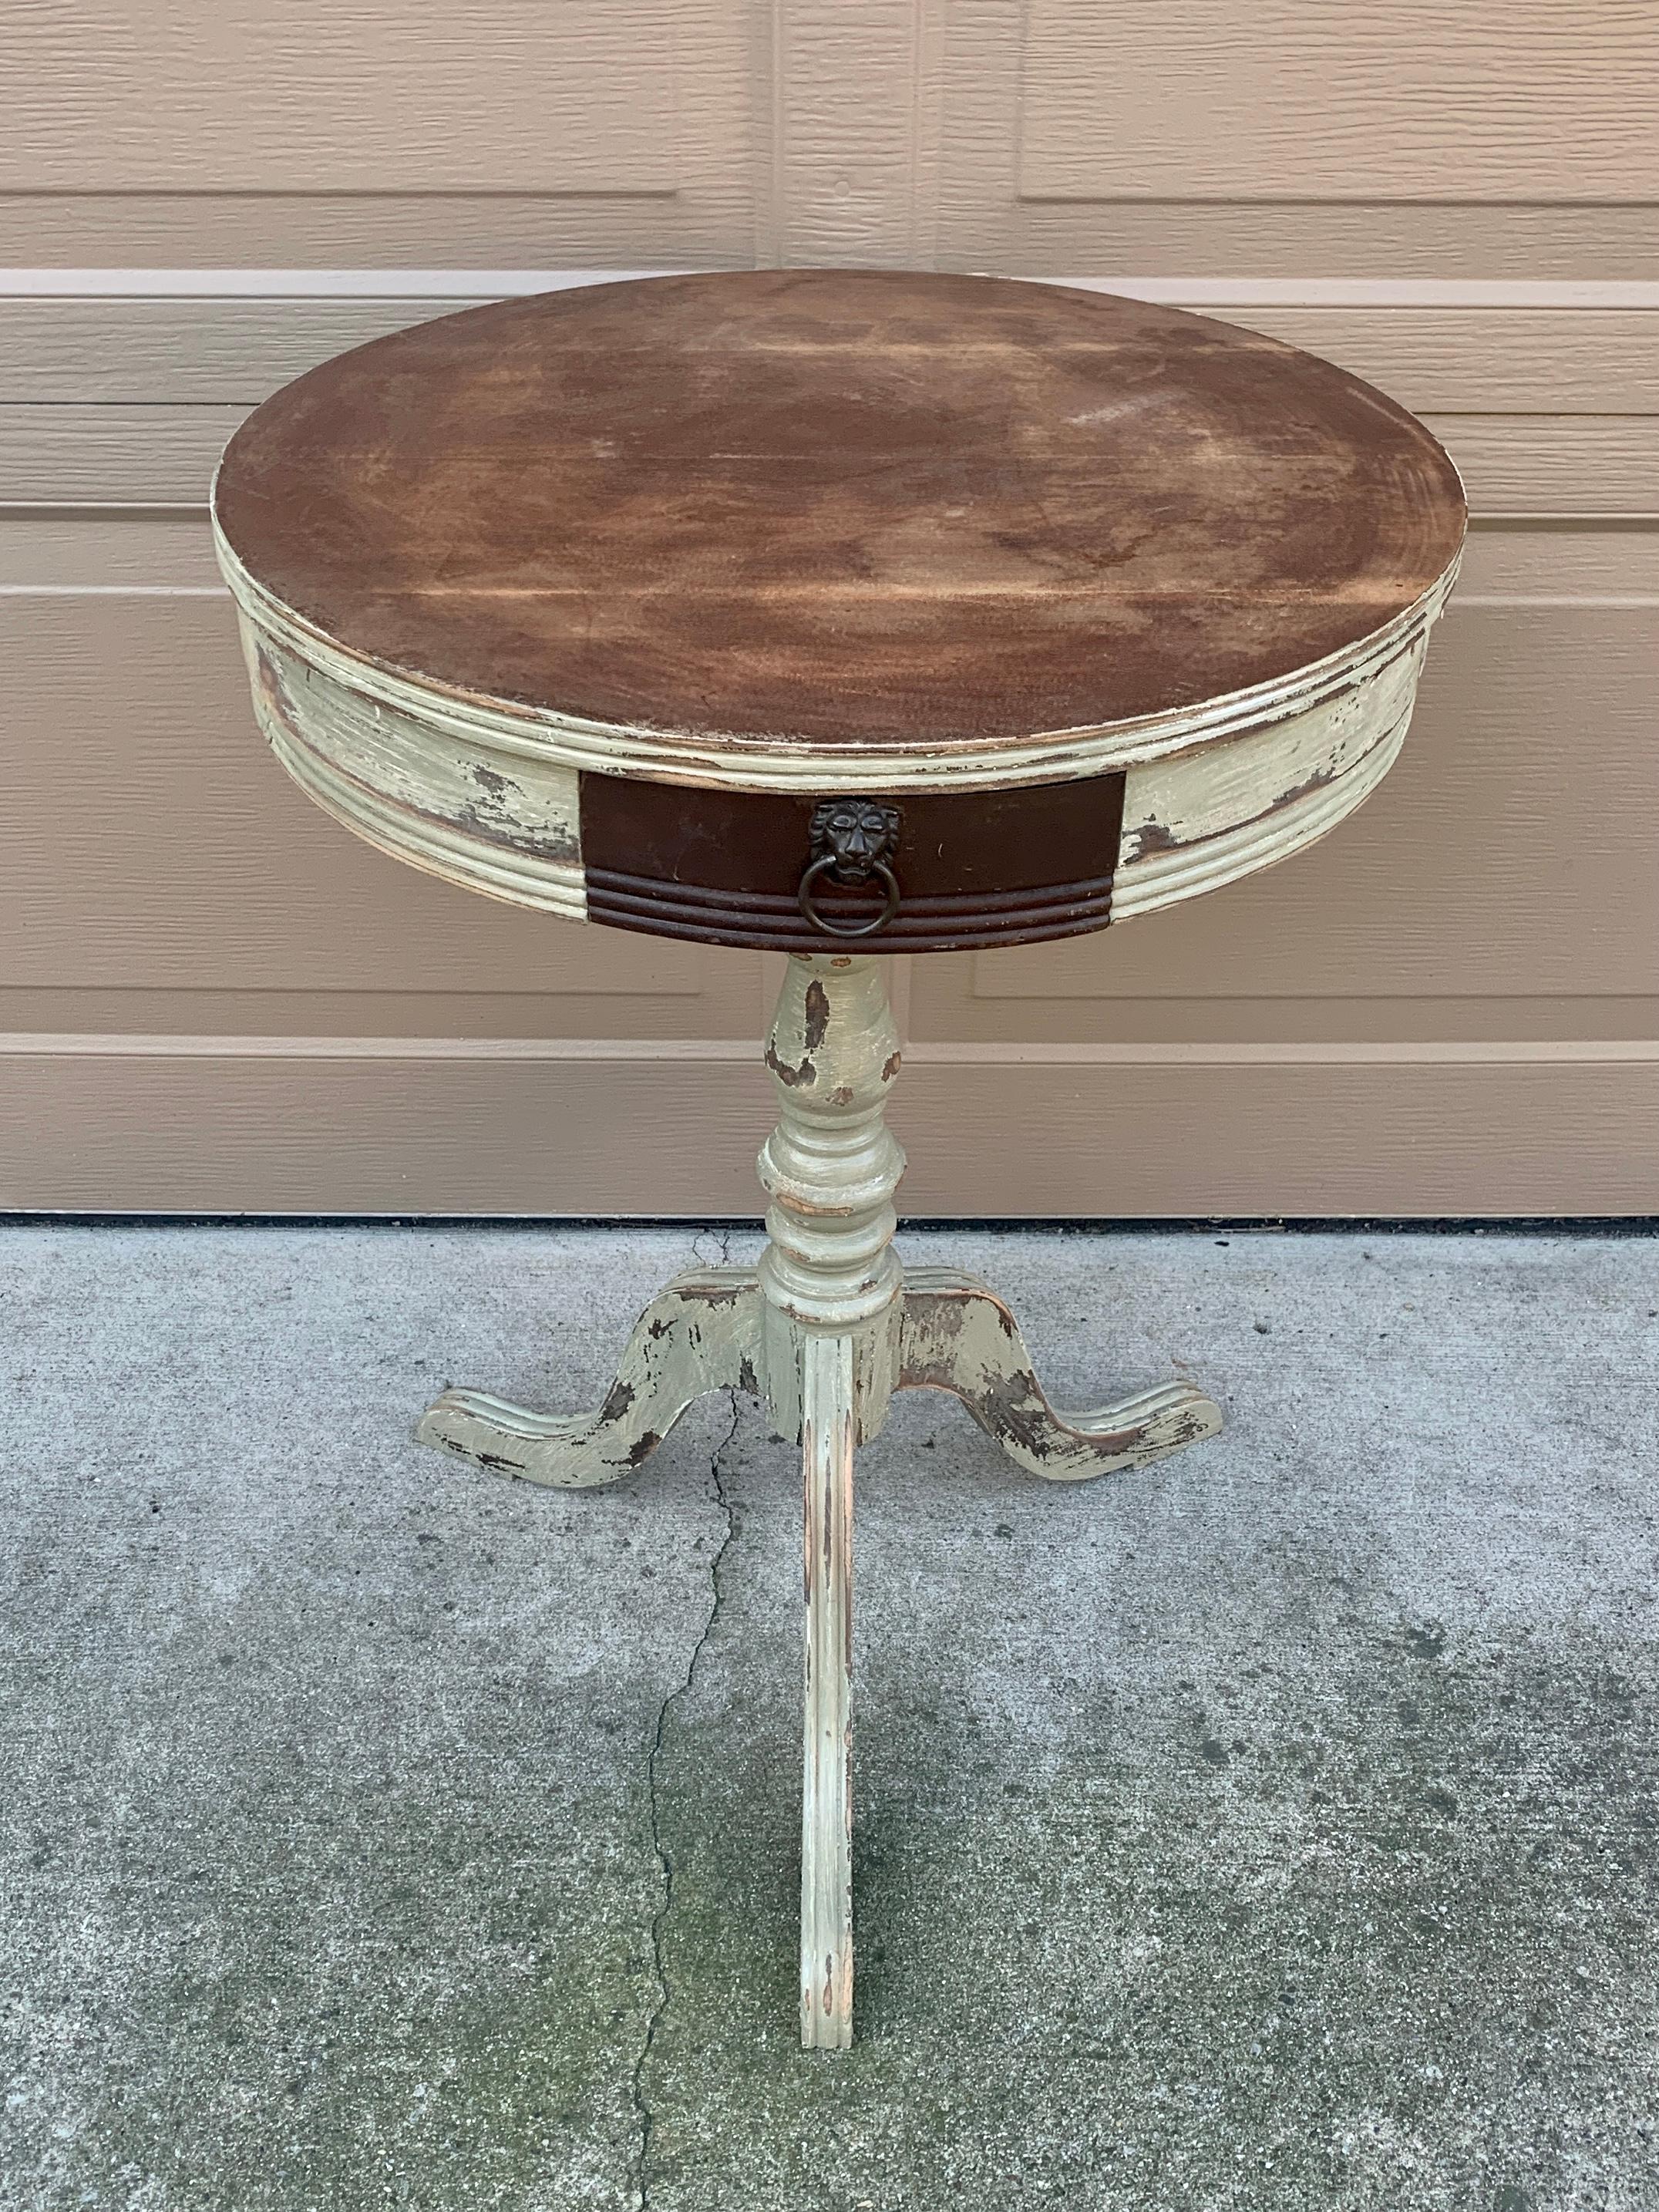 Antique American Regency Round Painted Walnut Side Table, Late 19th Century For Sale 1